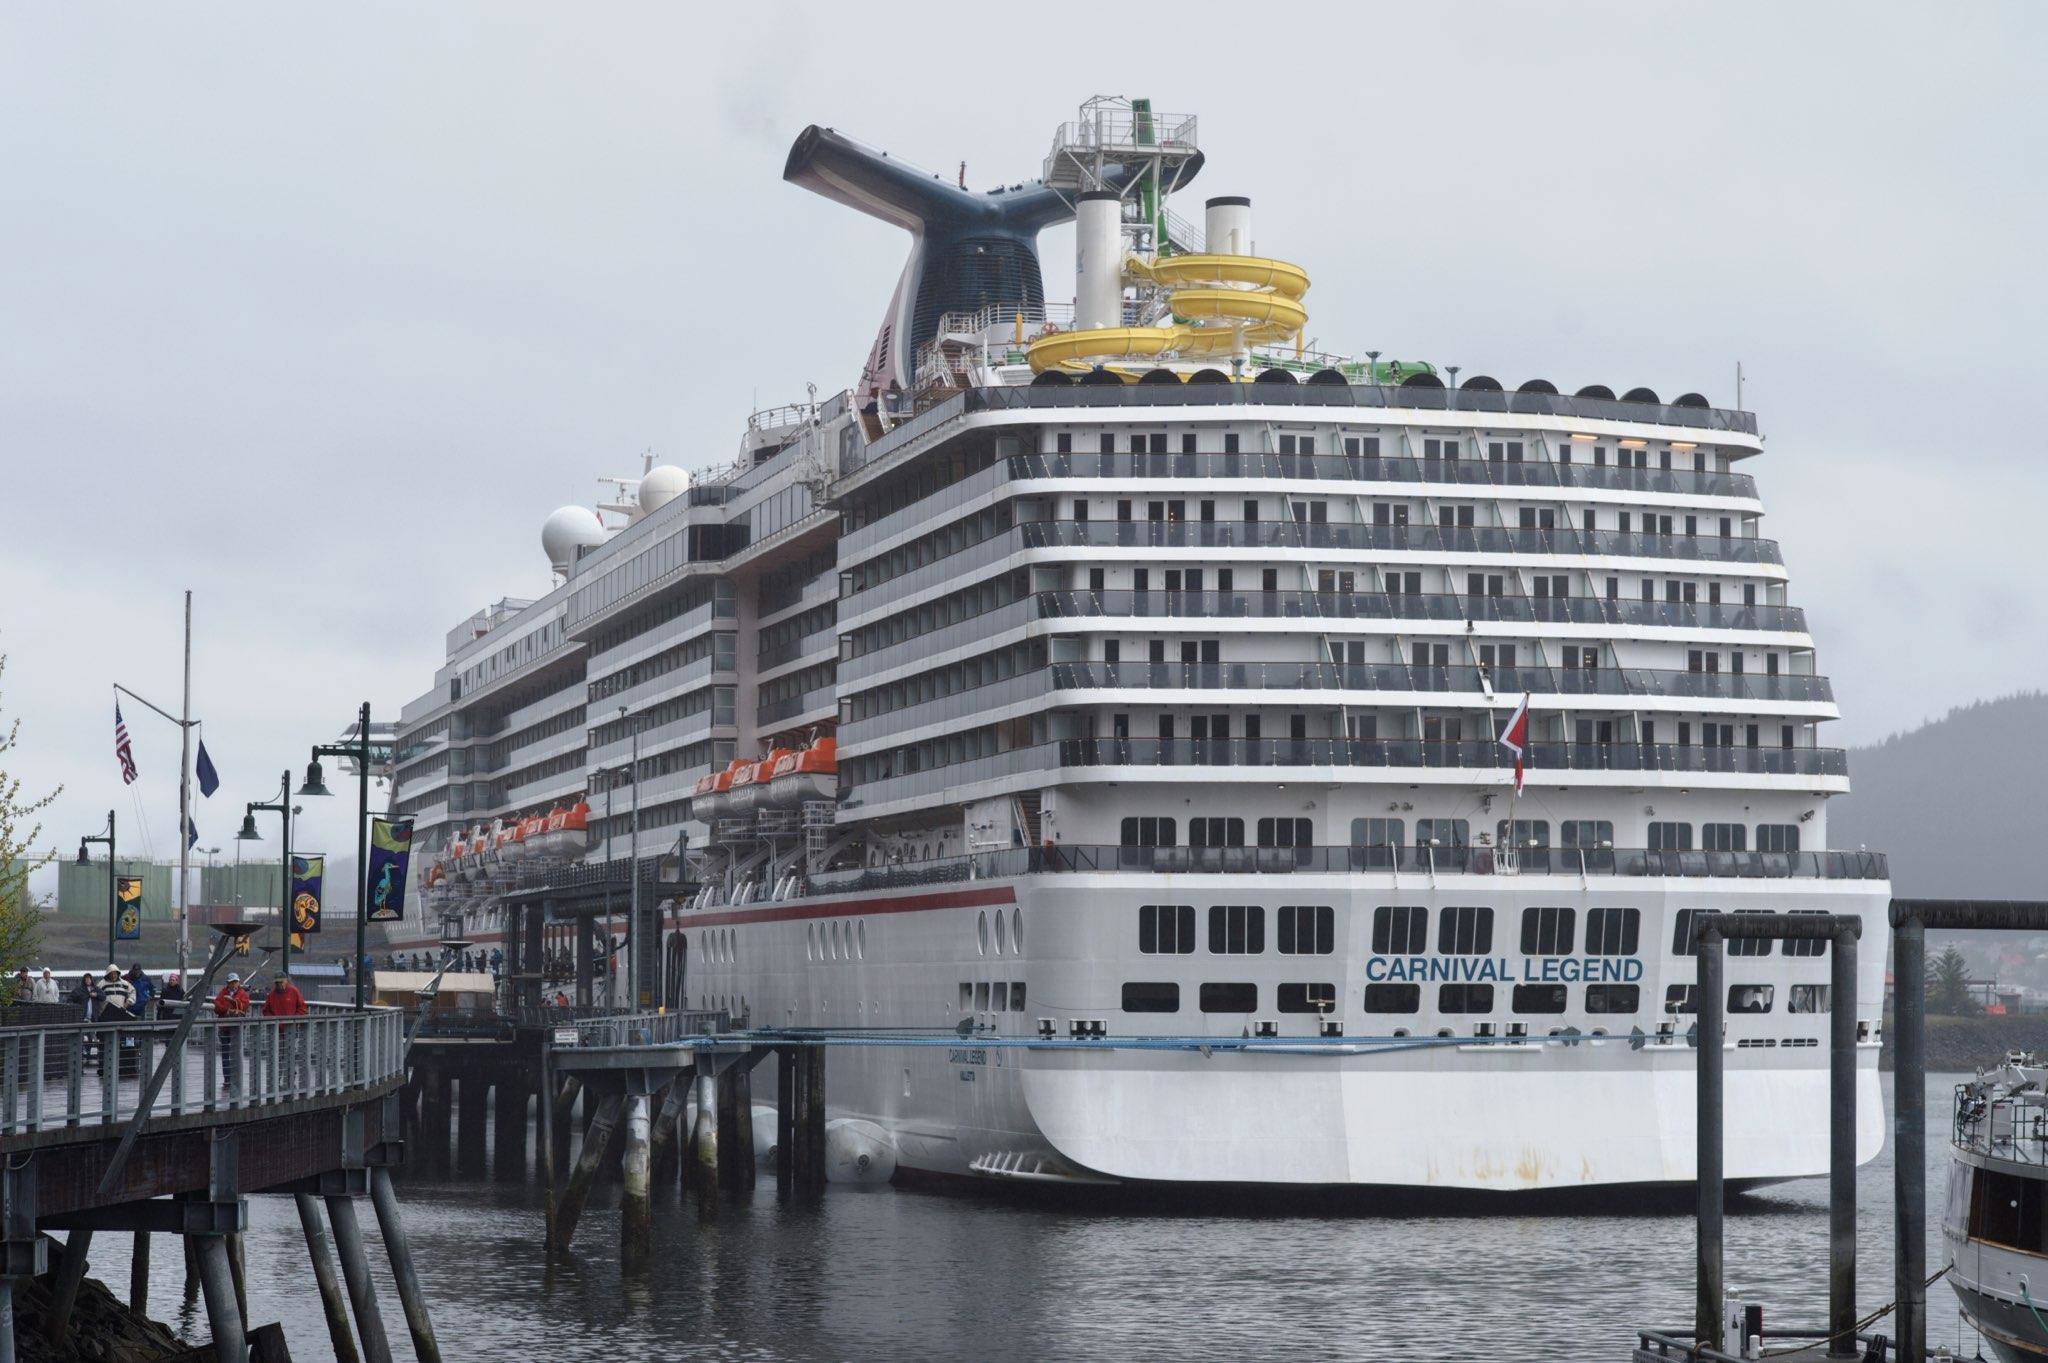 Passengers disembark from the cruise ship Carnival Legend at the South Franklin Dock on Wednesday, May 8, 2019. The company was cited for excess air pollution last year. (Michael Penn | Juneau Empire)                                Passengers disembark from the cruise ship Carnival Legend at the South Franklin Dock on Wednesday, May 8, 2019. The company was cited for excess air pollution last year. (Michael Penn | Juneau Empire)